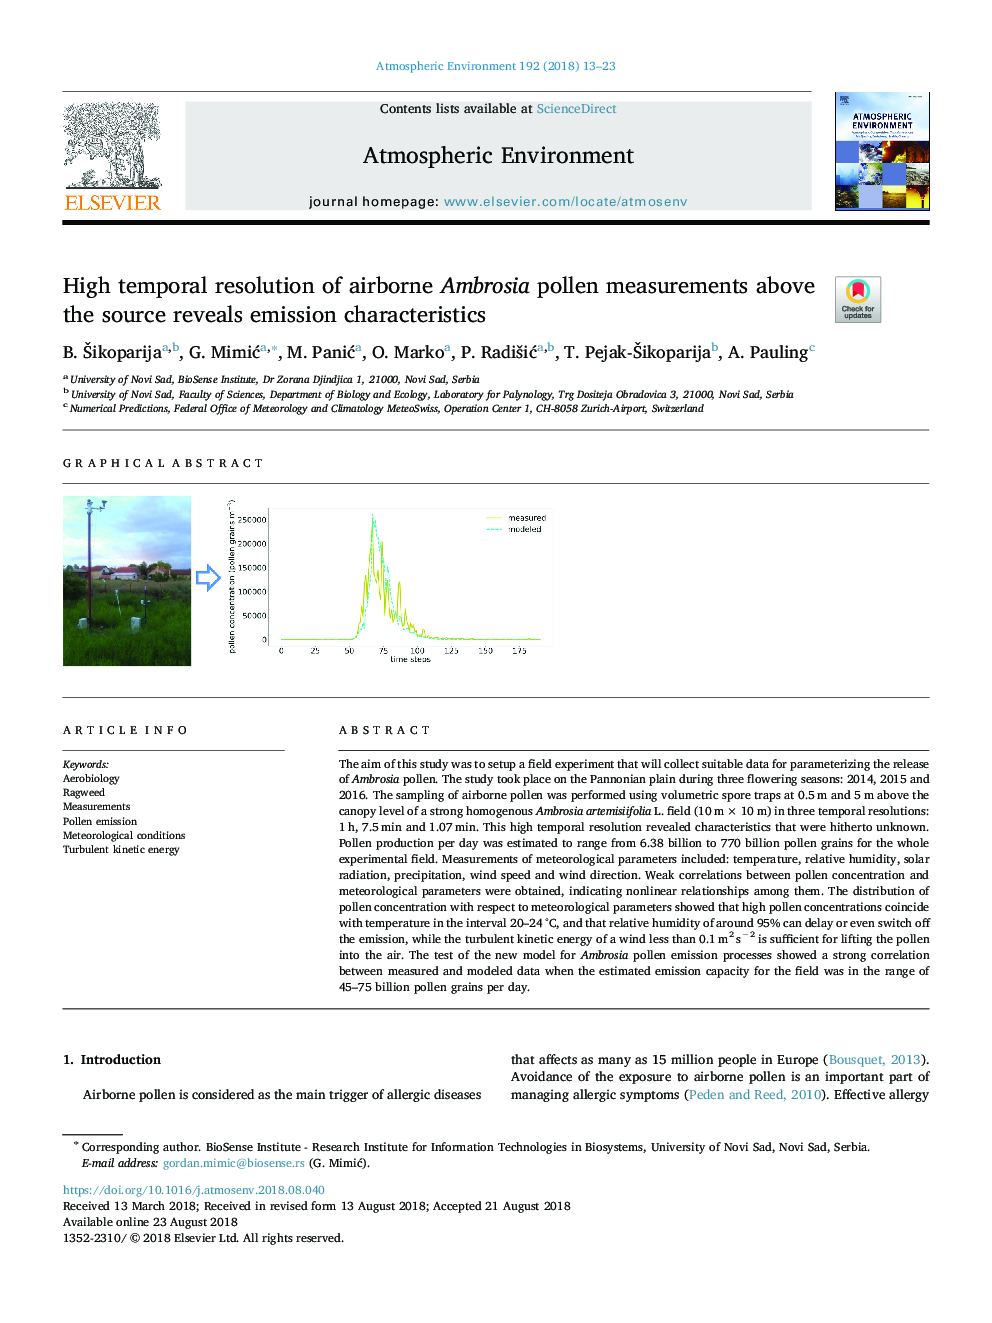 High temporal resolution of airborne Ambrosia pollen measurements above the source reveals emission characteristics